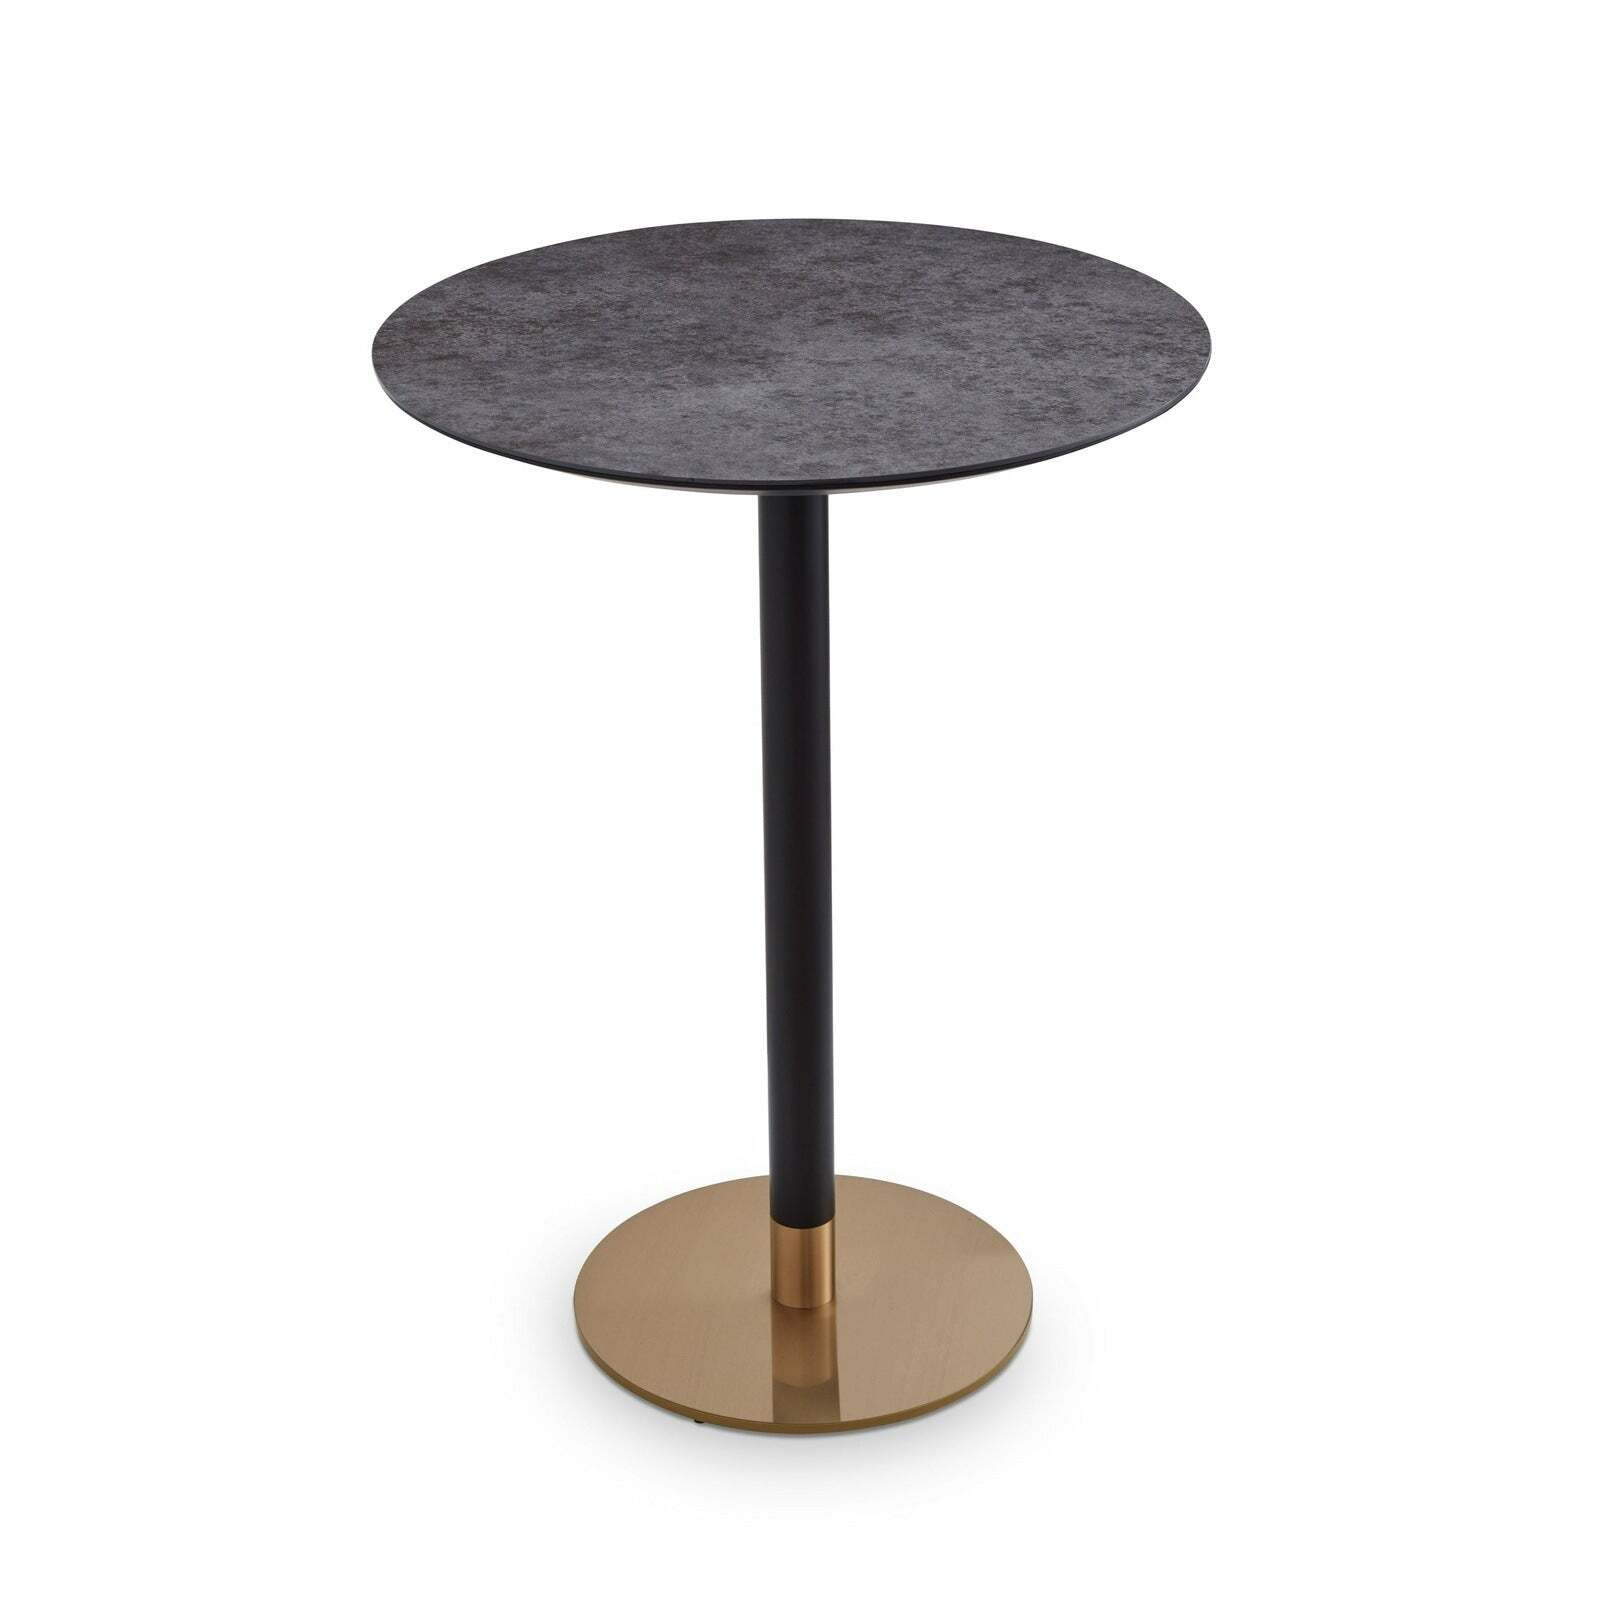 Liang & Eimil Theodore Bar Table in Dark Grey - image 1